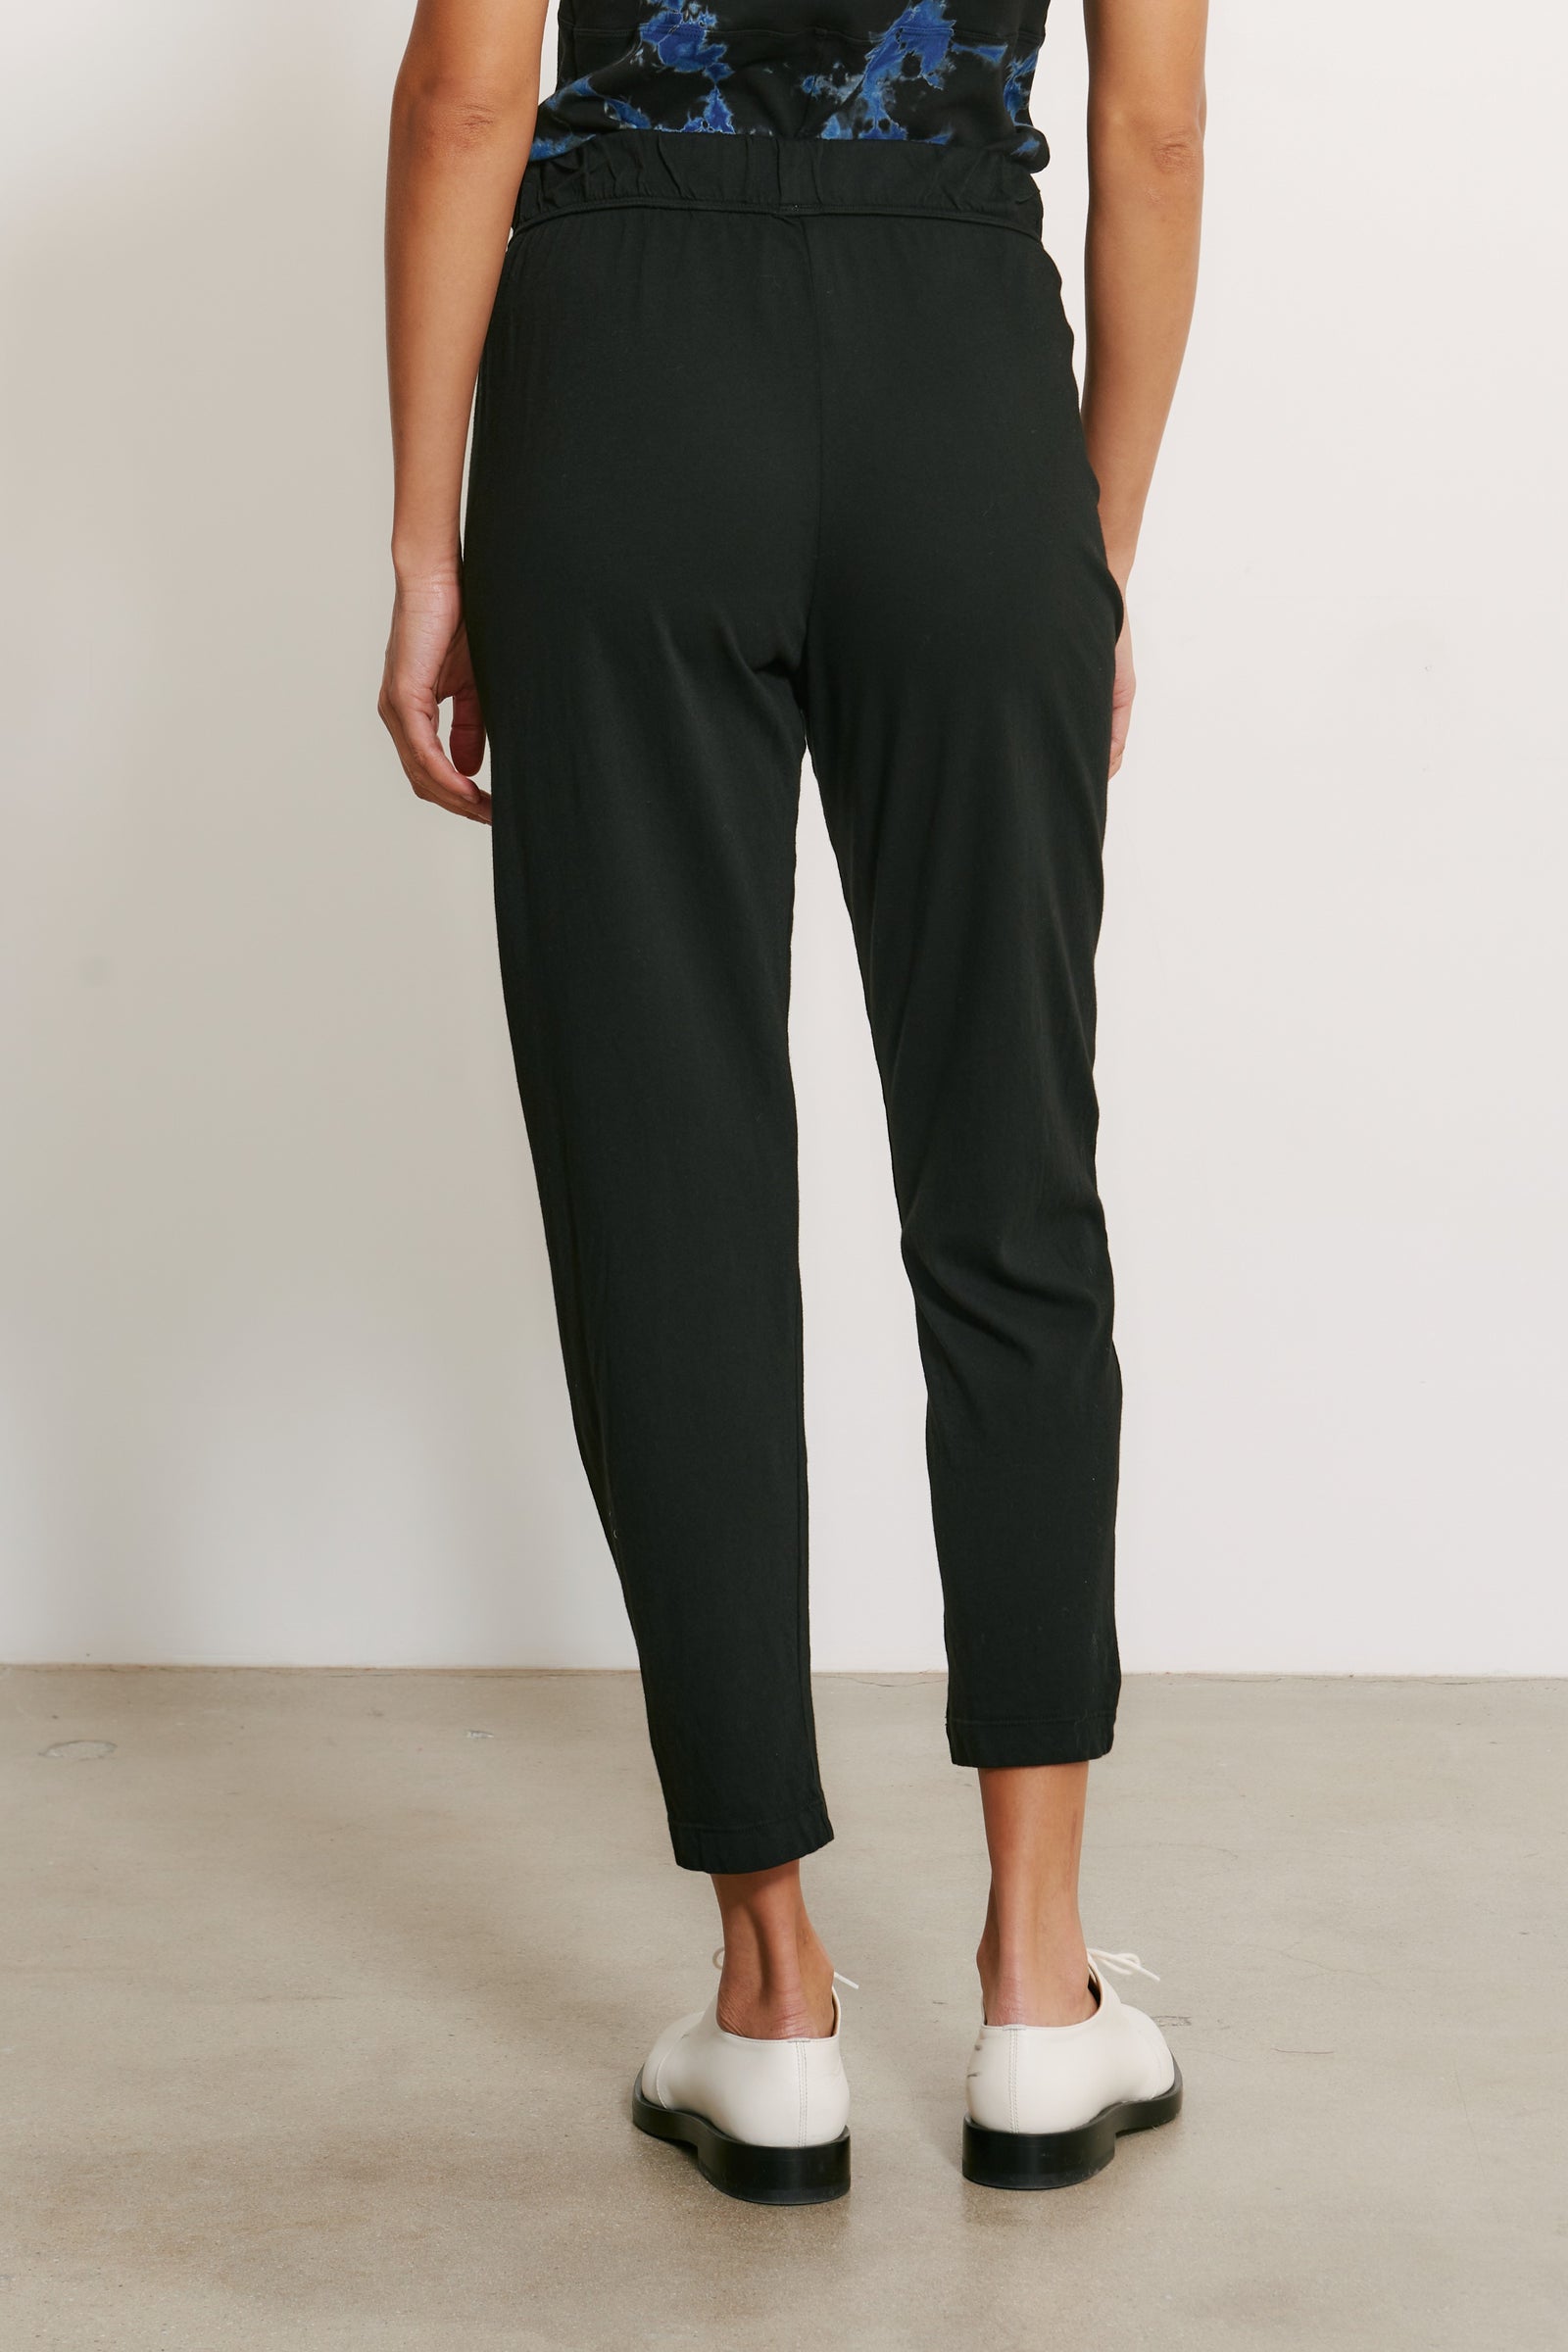 Black Classic Jersey Easy Pant Back Close-Up View